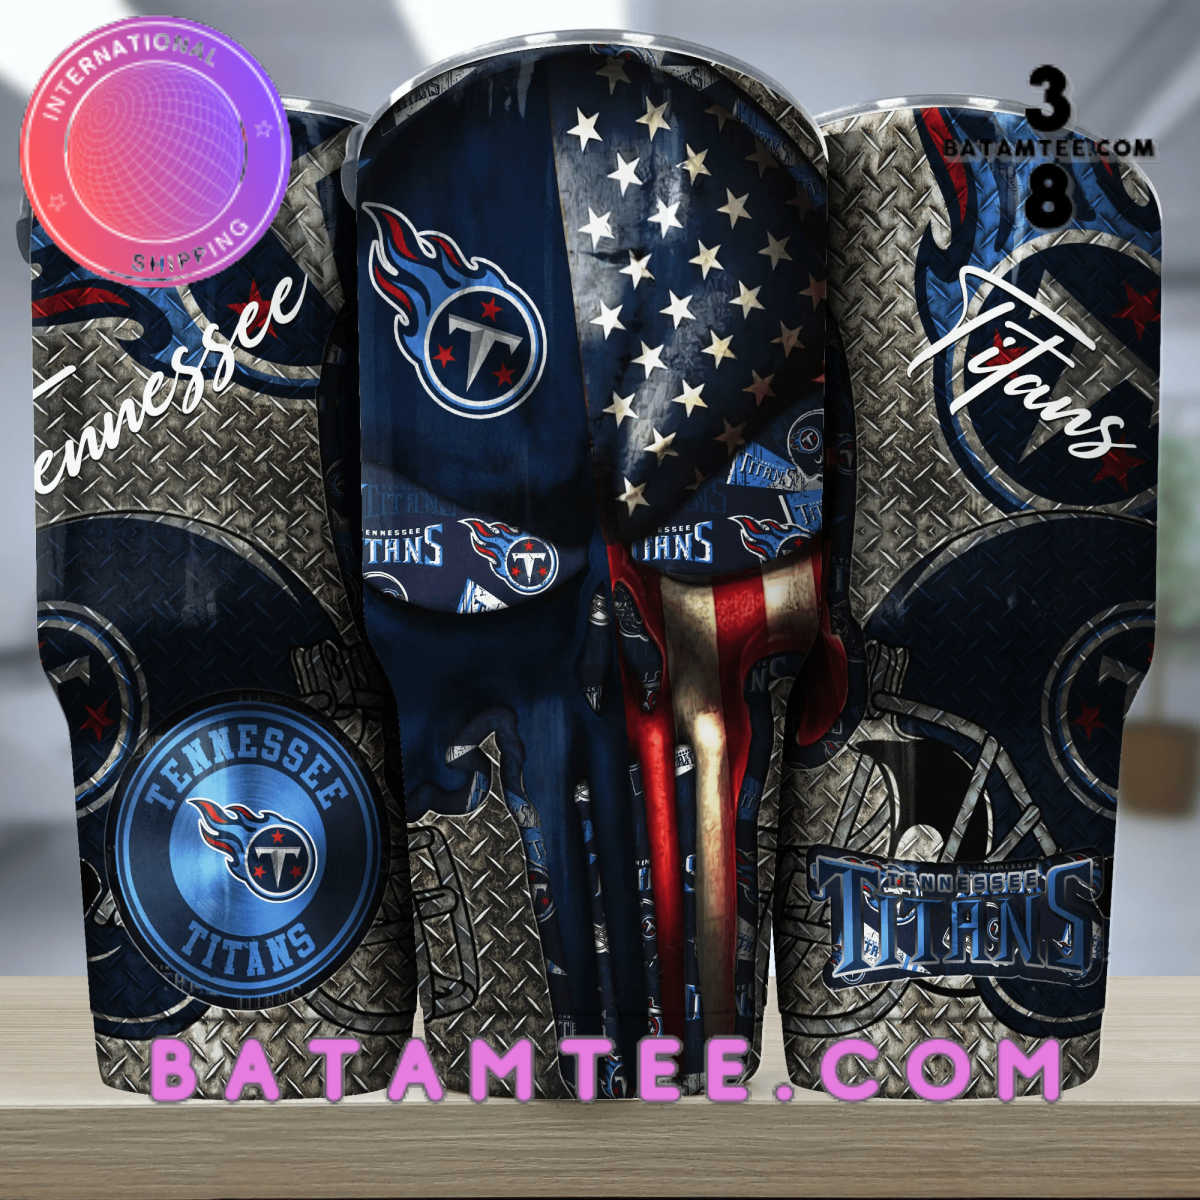 Tennessee Titans Skull Tumbler's Overview - Batamtee Shop - Threads & Totes: Your Style Destination